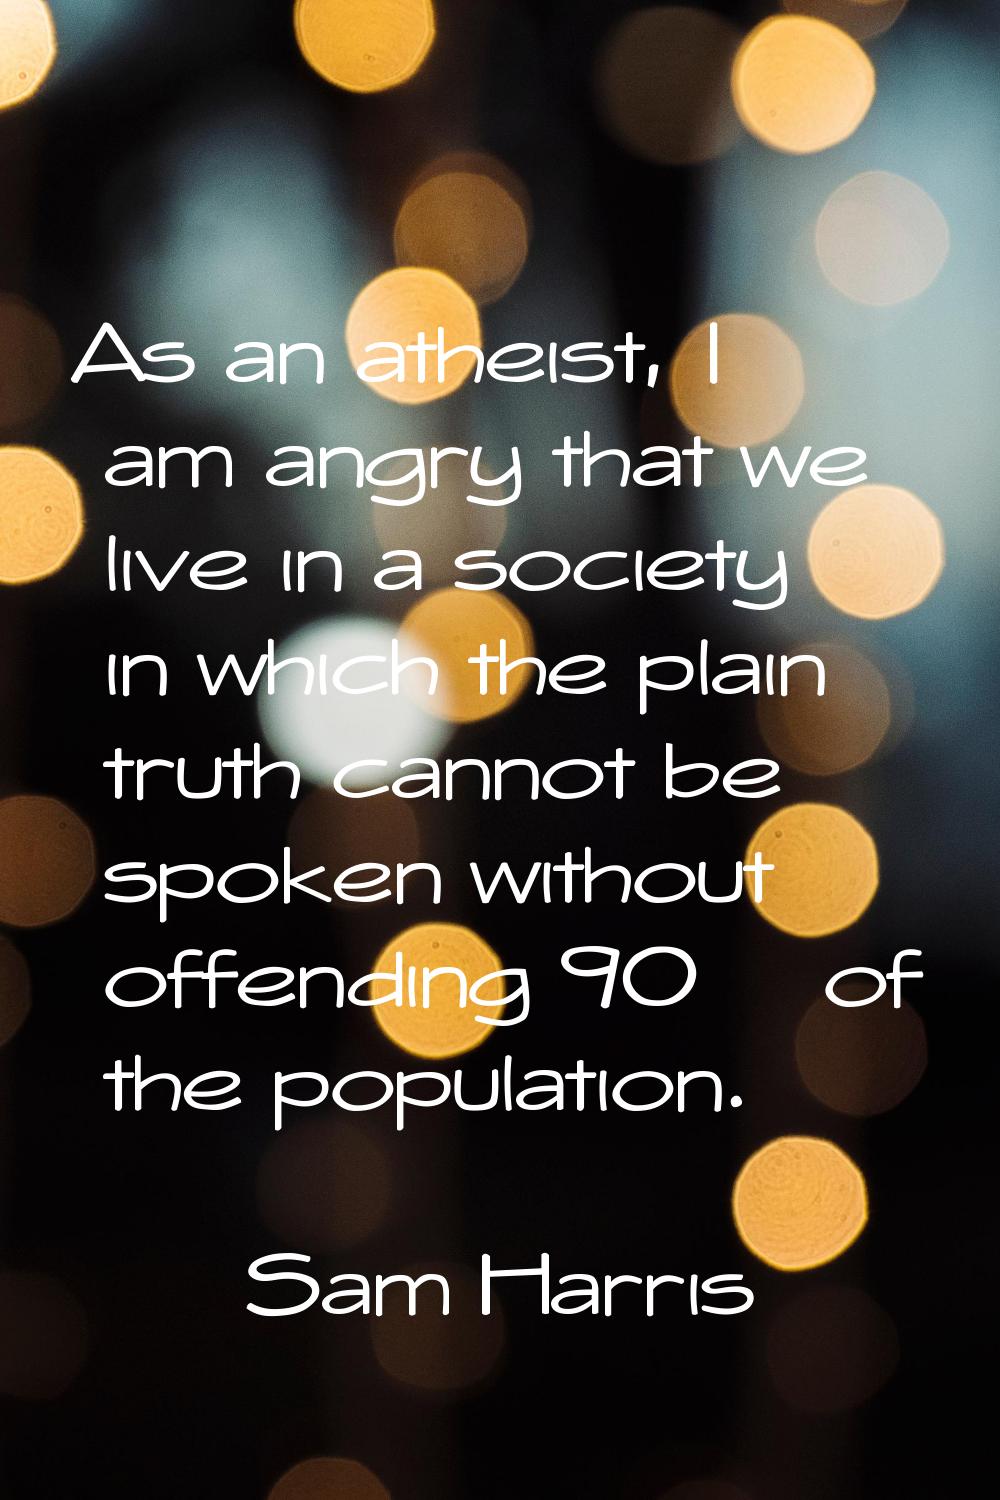 As an atheist, I am angry that we live in a society in which the plain truth cannot be spoken witho